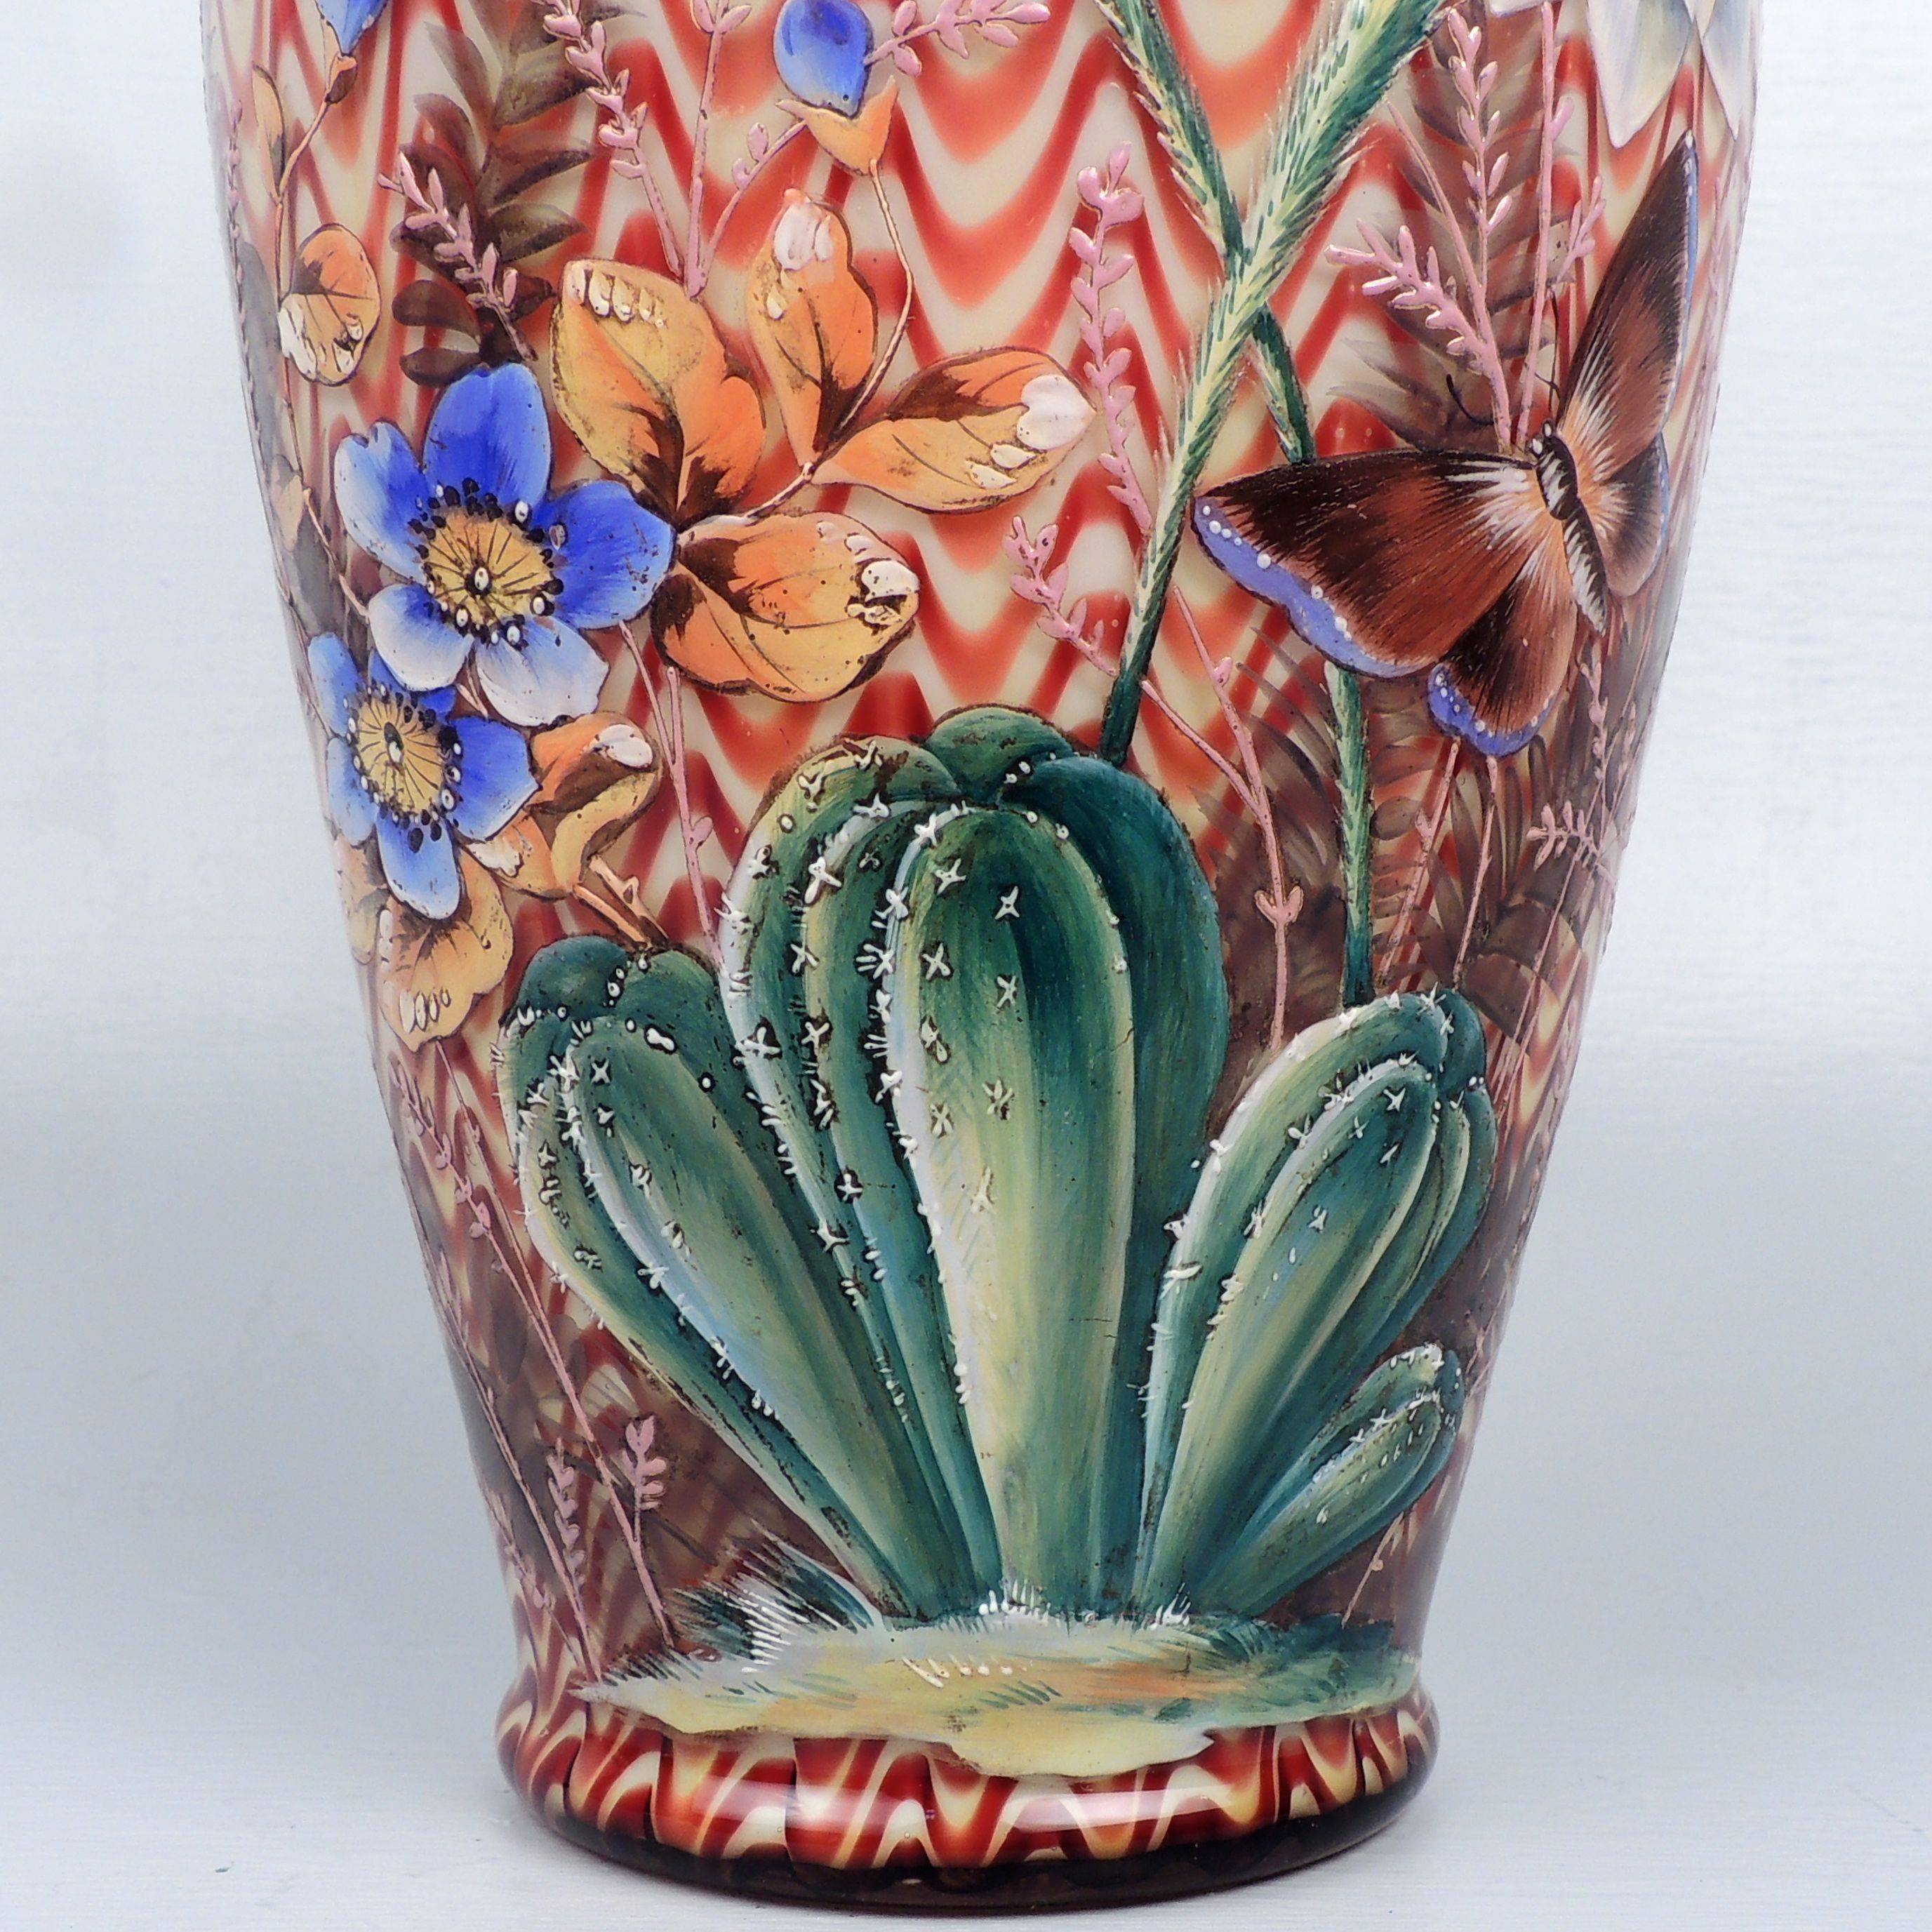 Blown Glass English Victorian Art Glass Vase with Enameled Flowers by Stevens & Williams